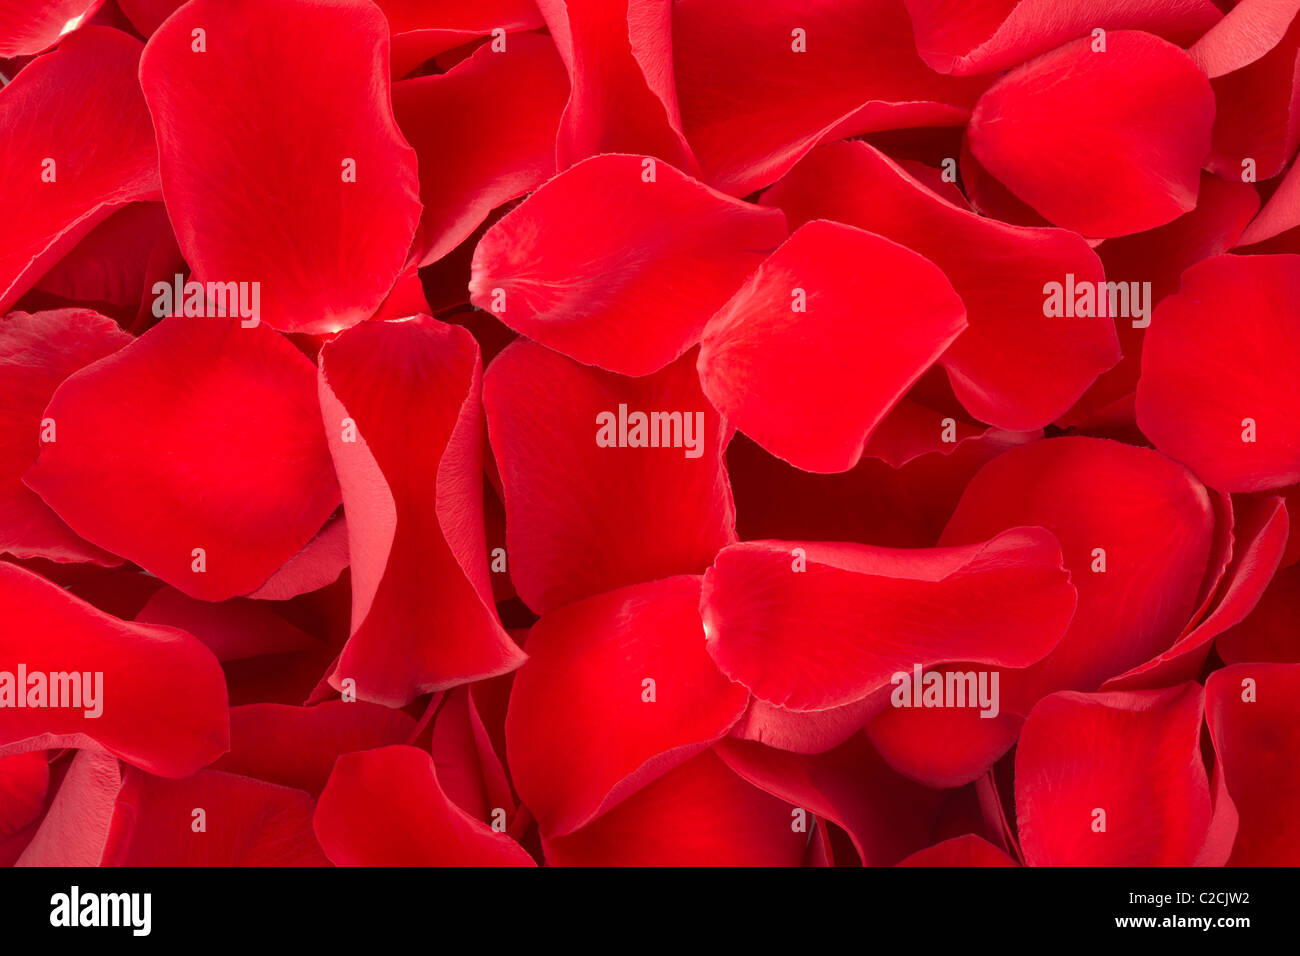 Red rose petals background Stock Photo